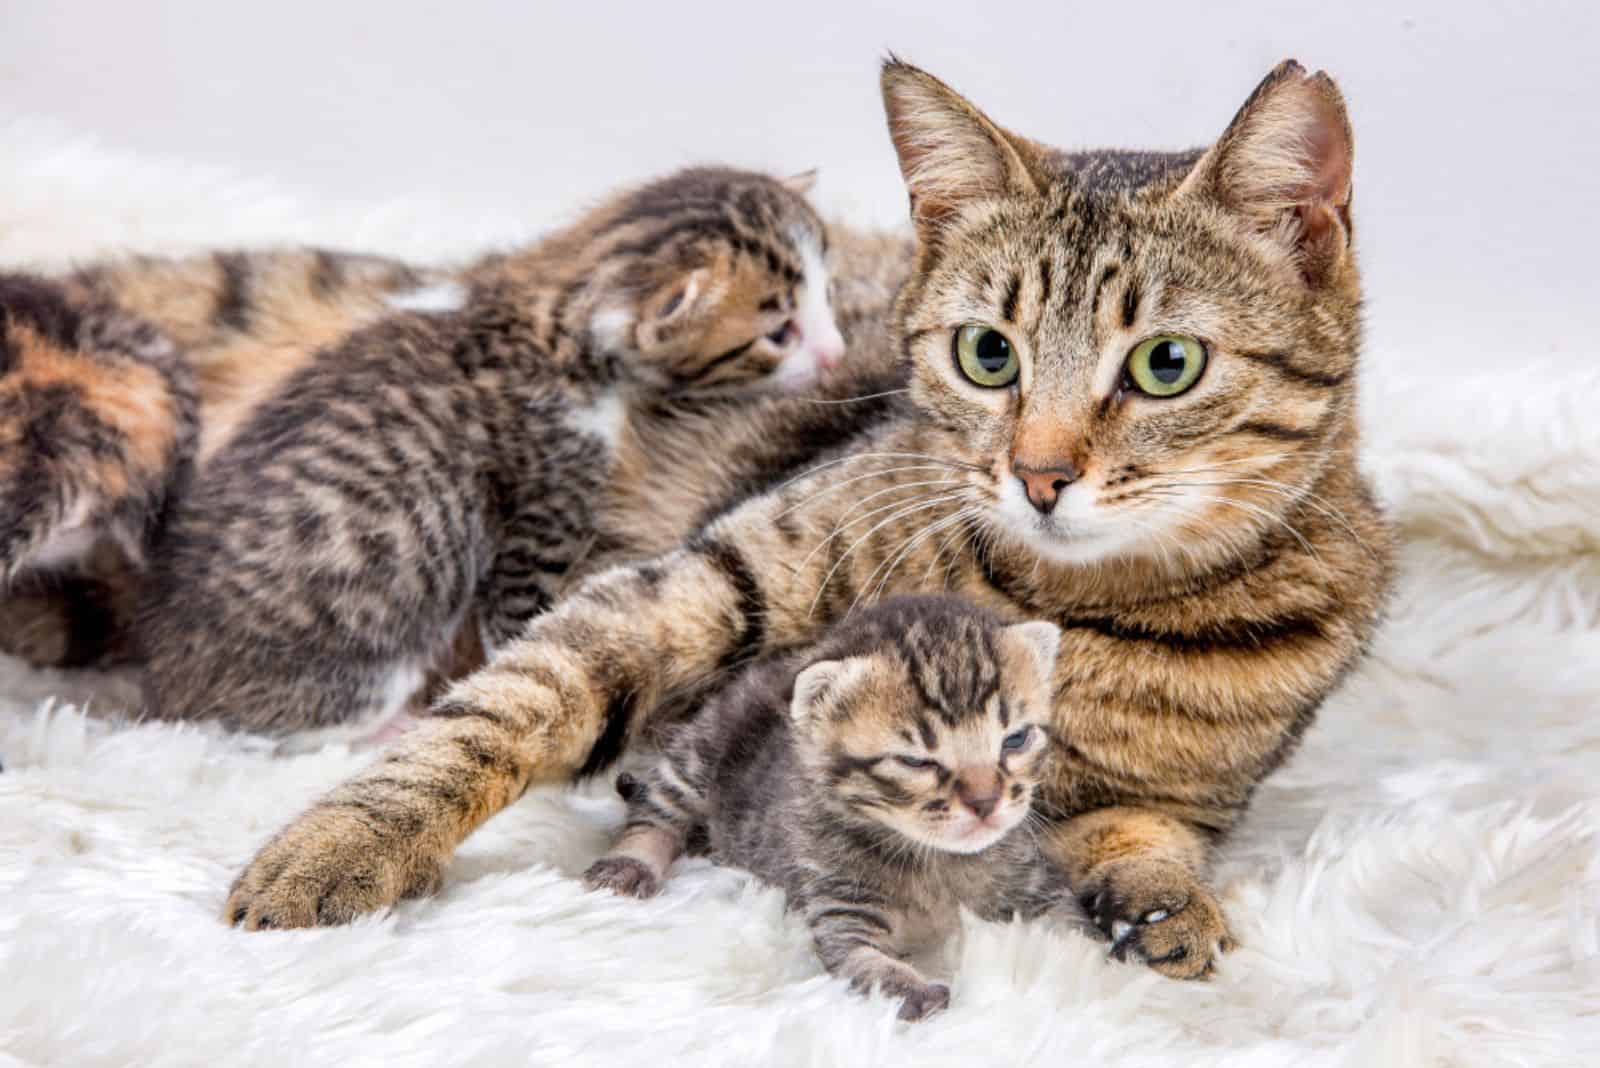 mother cat with her baby kittens